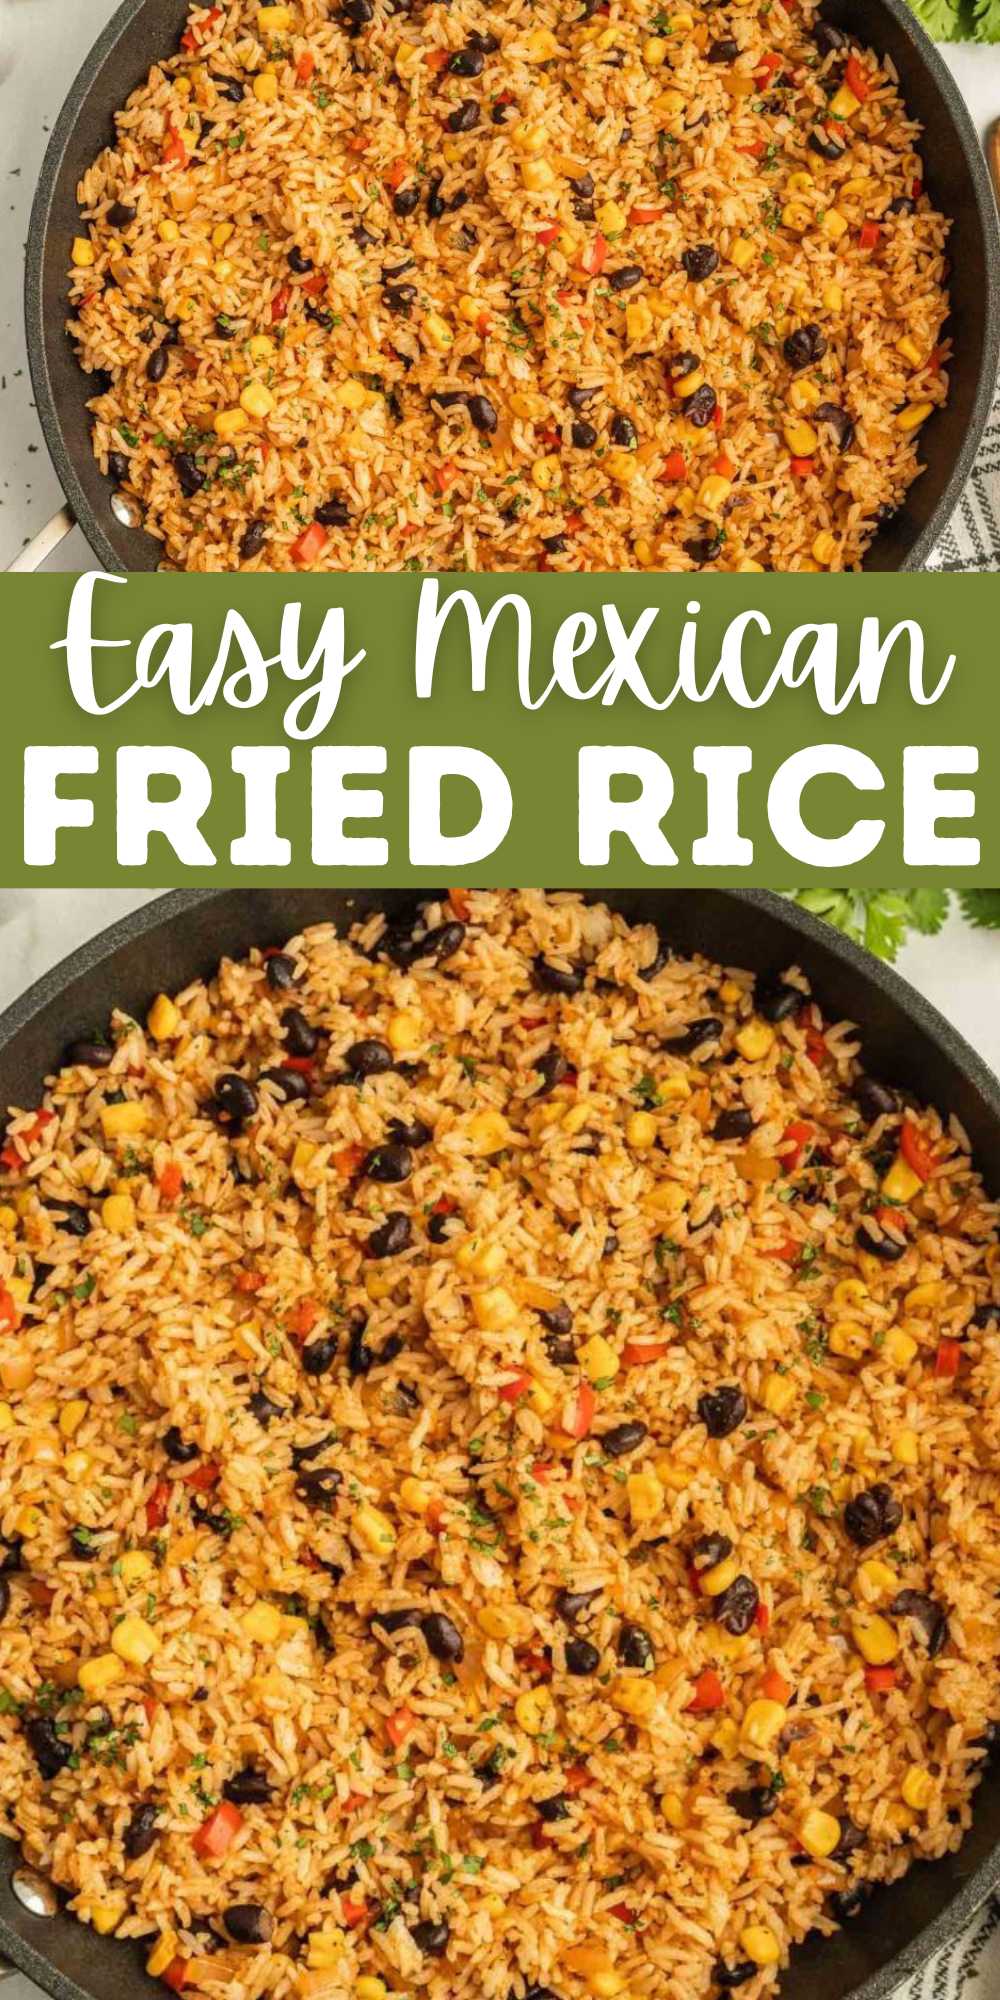 Mexican Fried Rice is an easy side dish and made with easy ingredients. If you are looking for a Mexican style rice, this is the one to make. Top with avocado and fresh cilantro for delicious flavor and a crowd pleasing side dish. #eatingonadime #mexicanfriedrice #friedrice